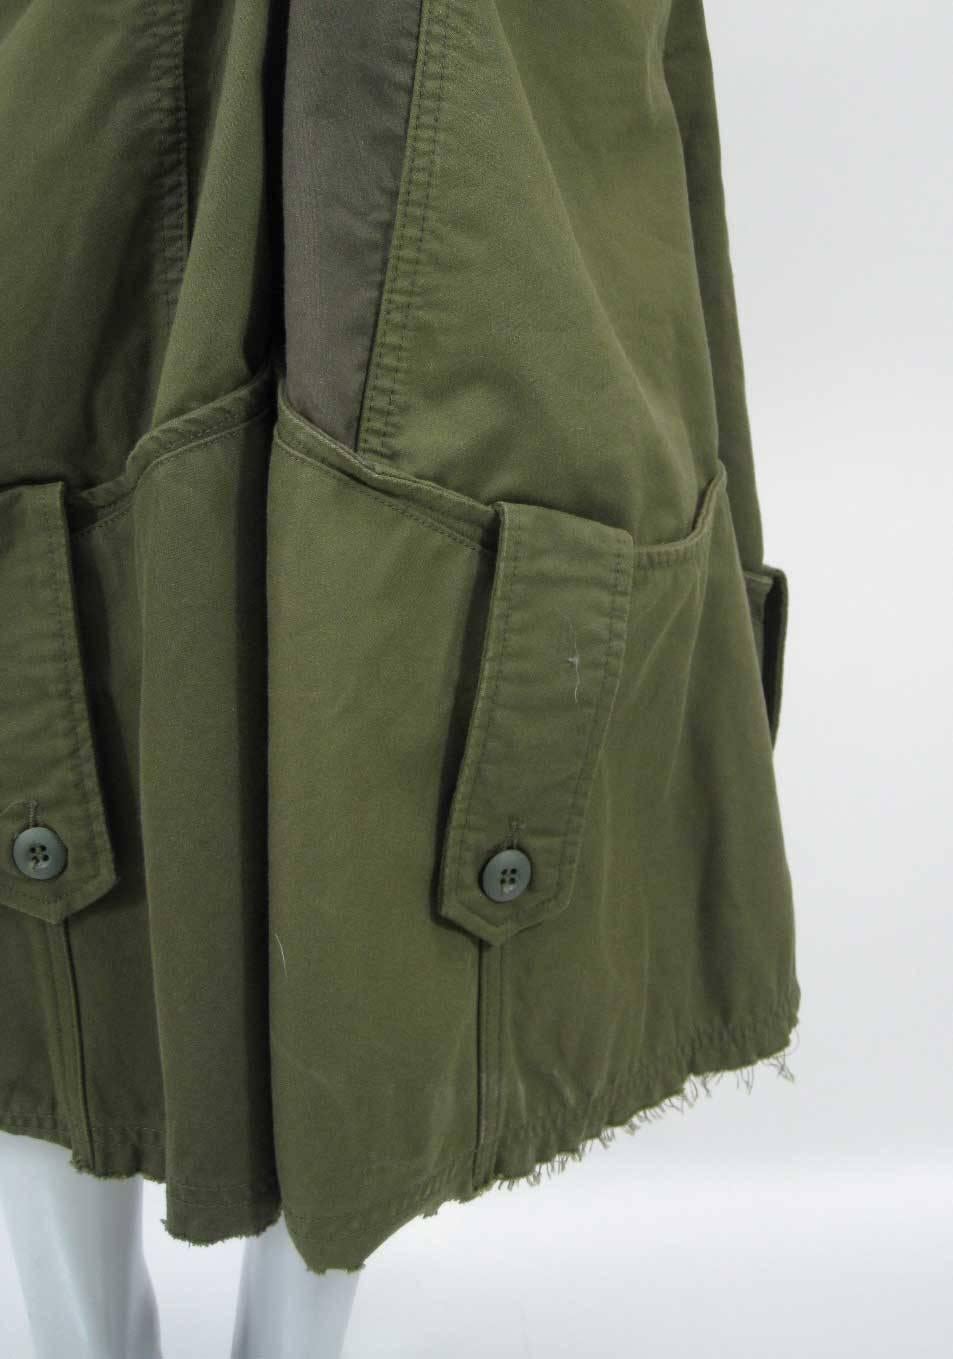 Junya Watanabe Commes des Garcons 2006 Deconstructed Military Skirt In Excellent Condition In Oakland, CA